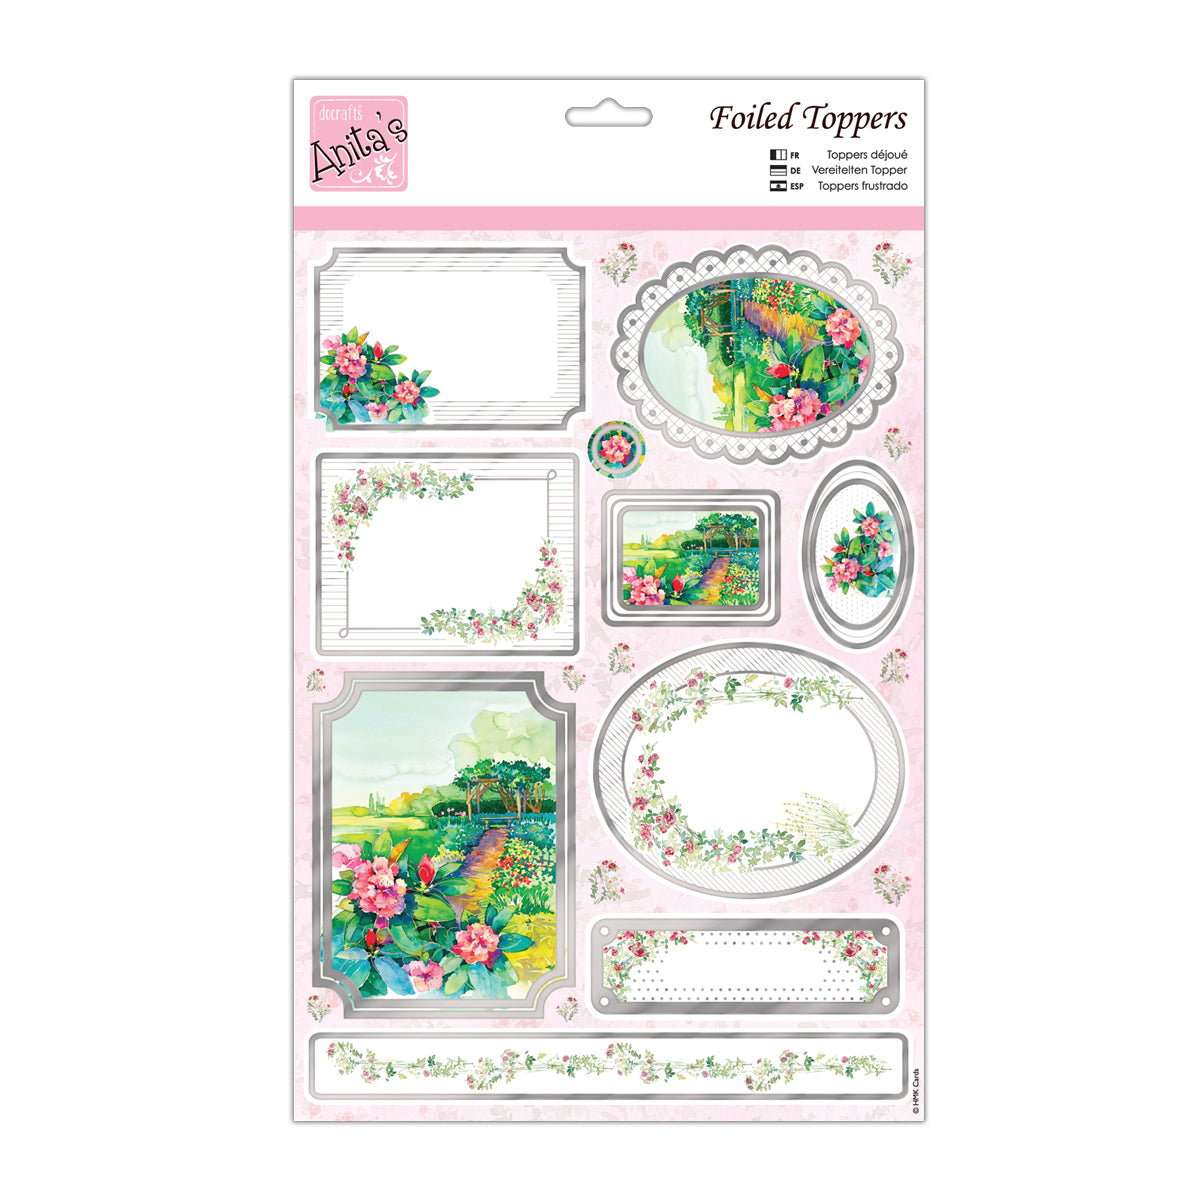 Anita's Foiled A4 card toppers & paper - Floral Scene